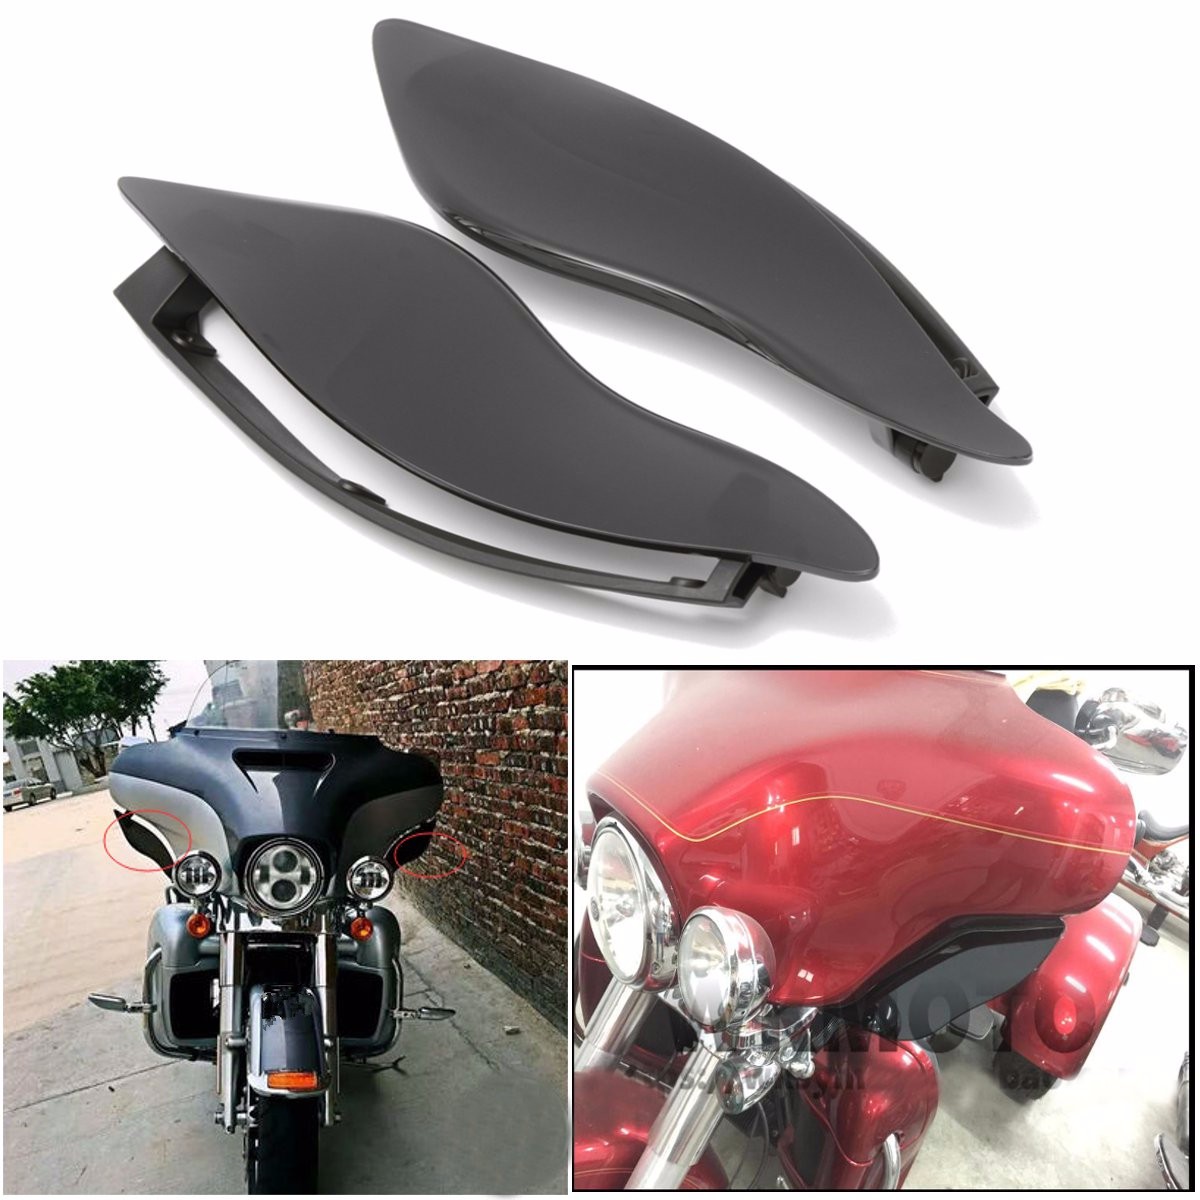 

Batwing Fairing Side Wing Deflector For Harley 14-16 For Electra For Street Glide